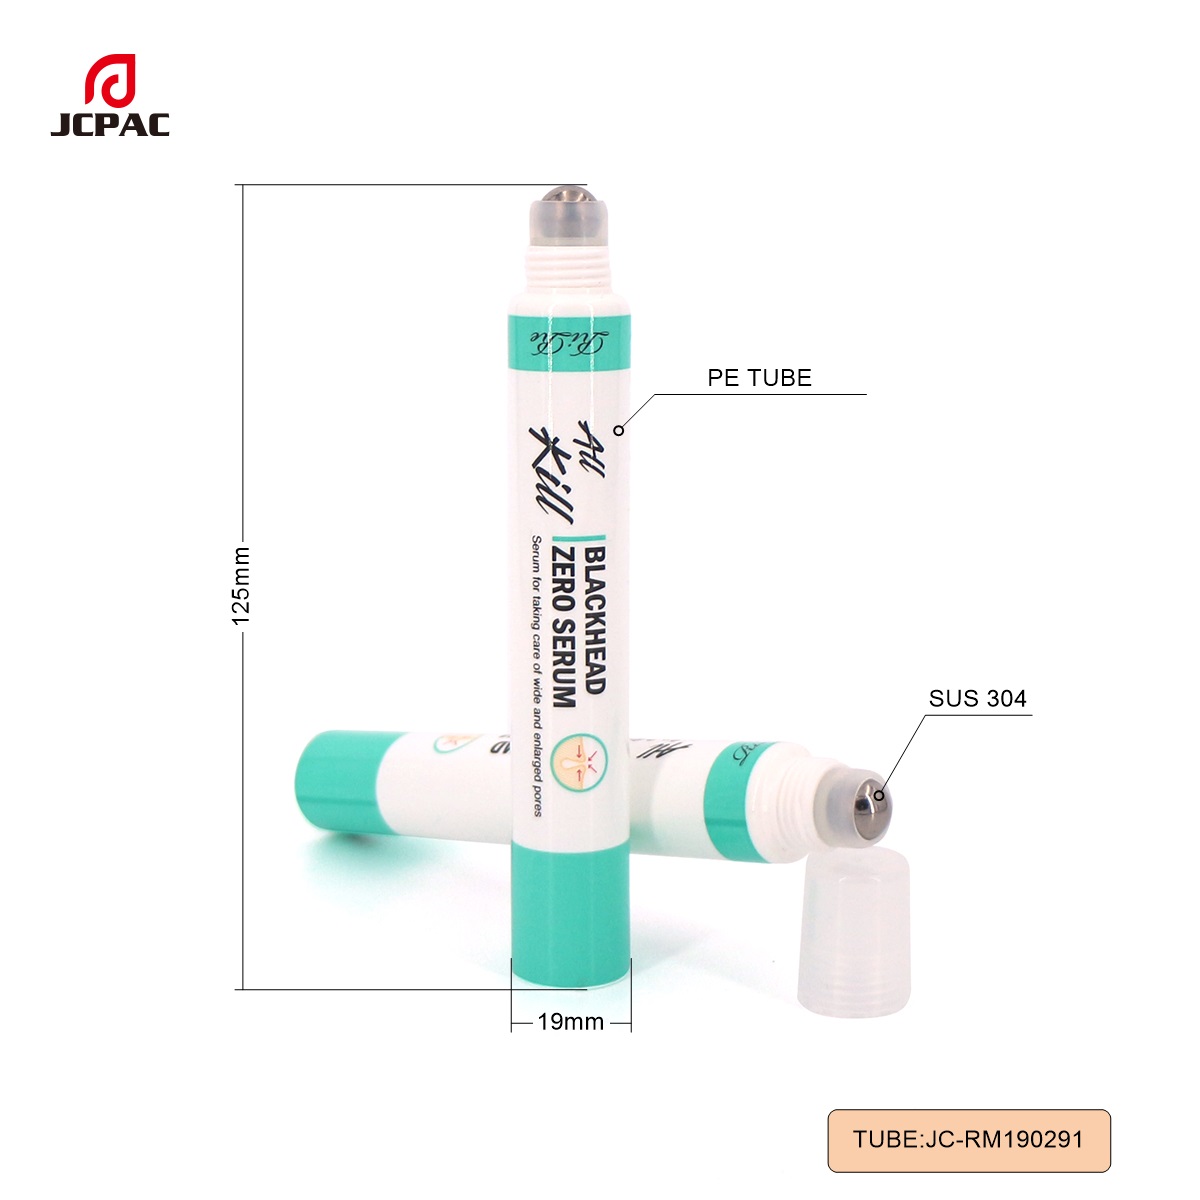 RM190291 19mm 20ml Acne Treatment Tube,Soft Tubes With Single Roller Ball Applicator 